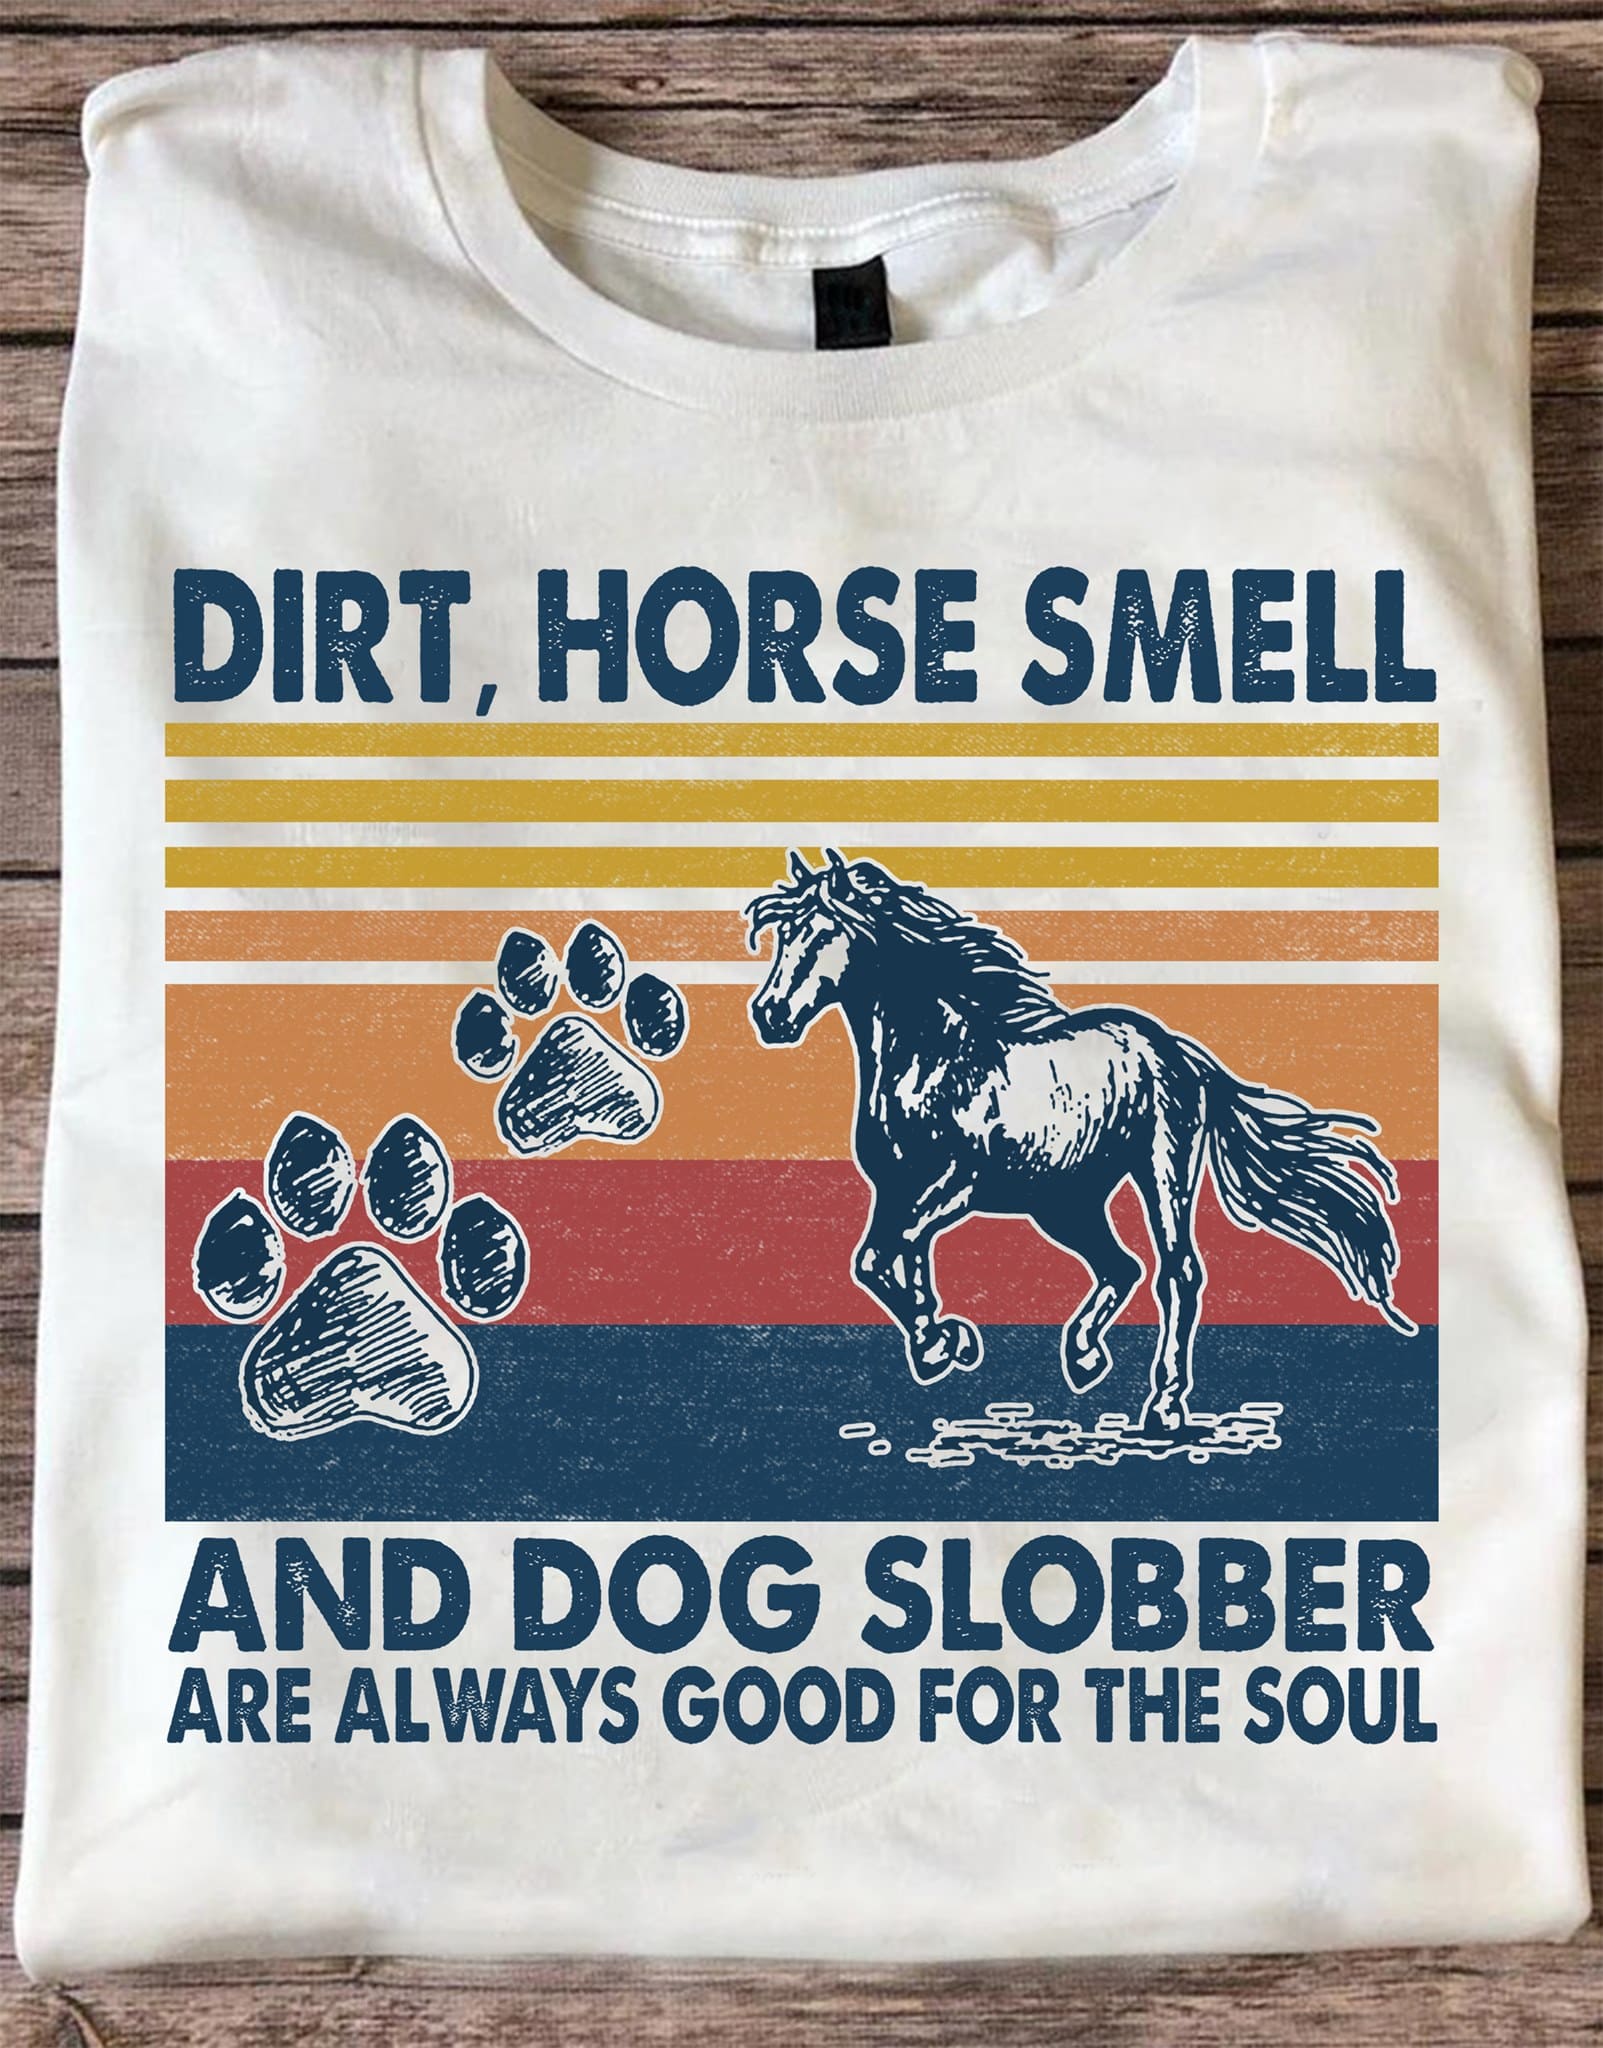 Dirt, horse smell and dog slobber are always good for the soul - Dog footprint, horse graphic T-shirt, dog and horse